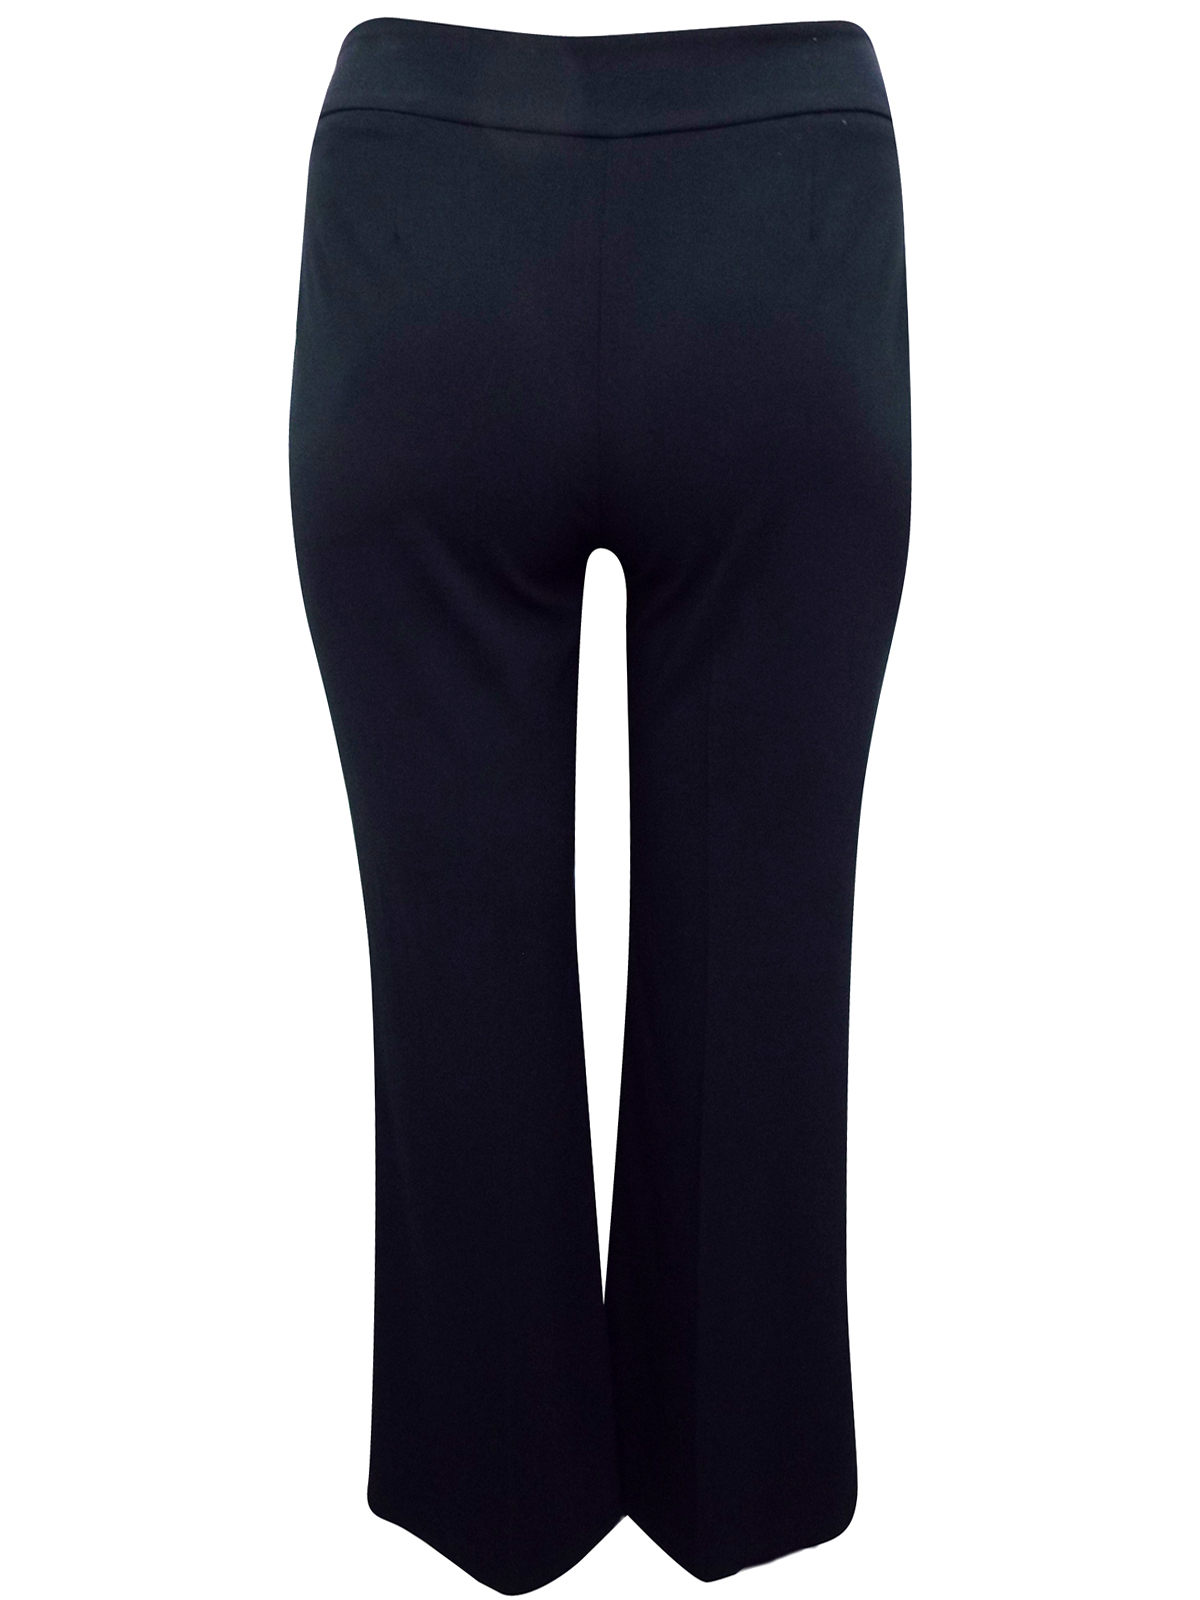 Marks and Spencer - - M&5 BLACK Flat Front Bootleg Trousers - Size 14 to 20